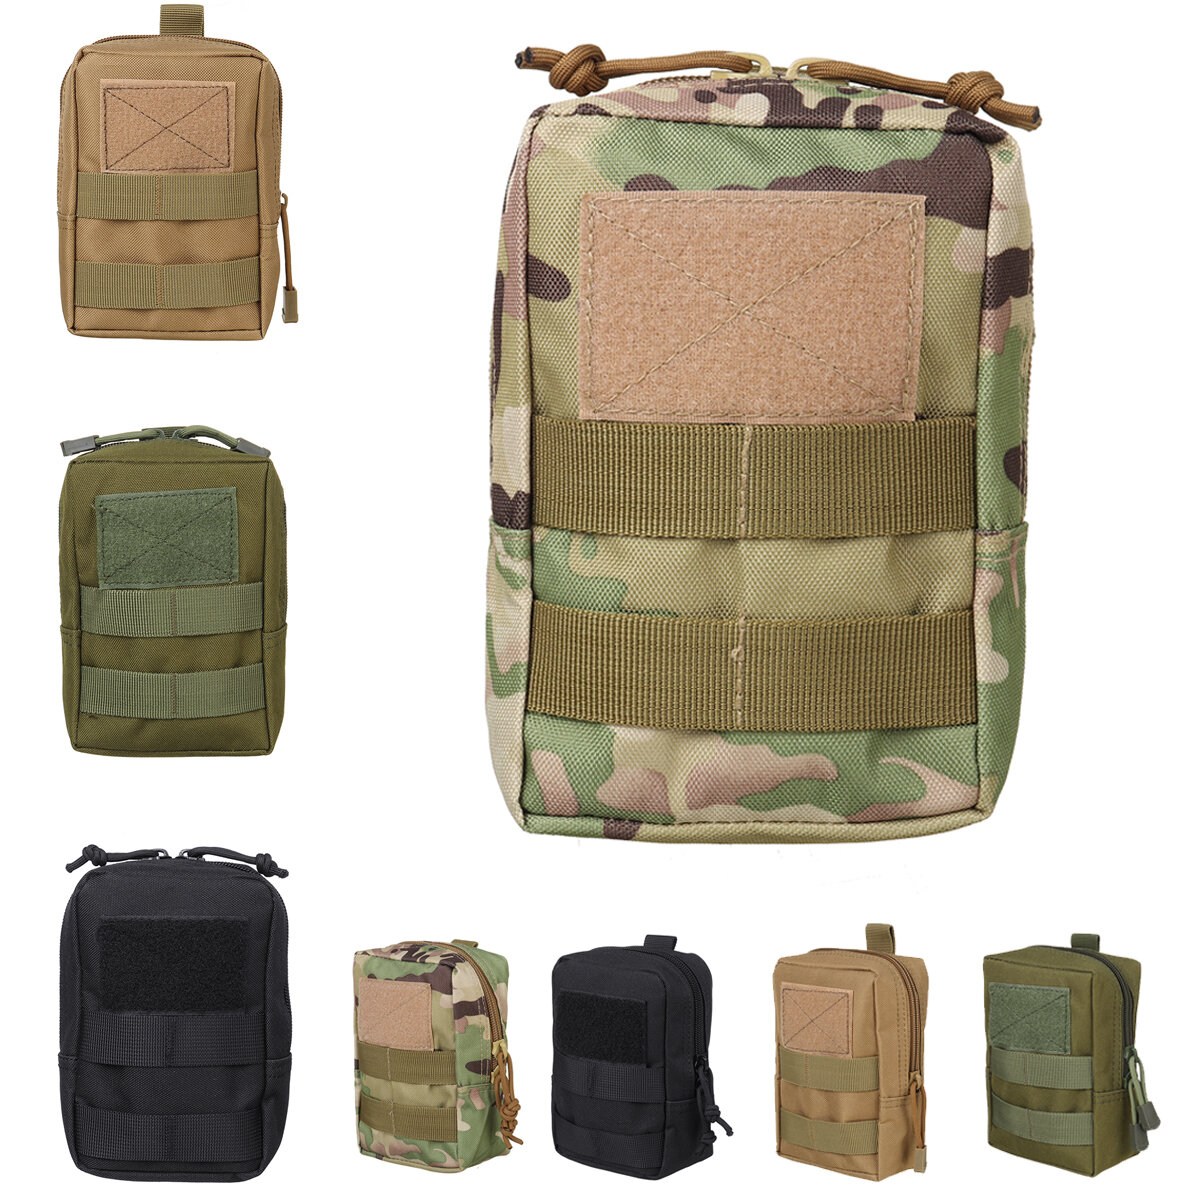 Military Tactical Camo Belt Pouch Bag Pack Phone Bags Molle Pouch Camping Waist Pocket Bag Phone Case Pocket For Hunting